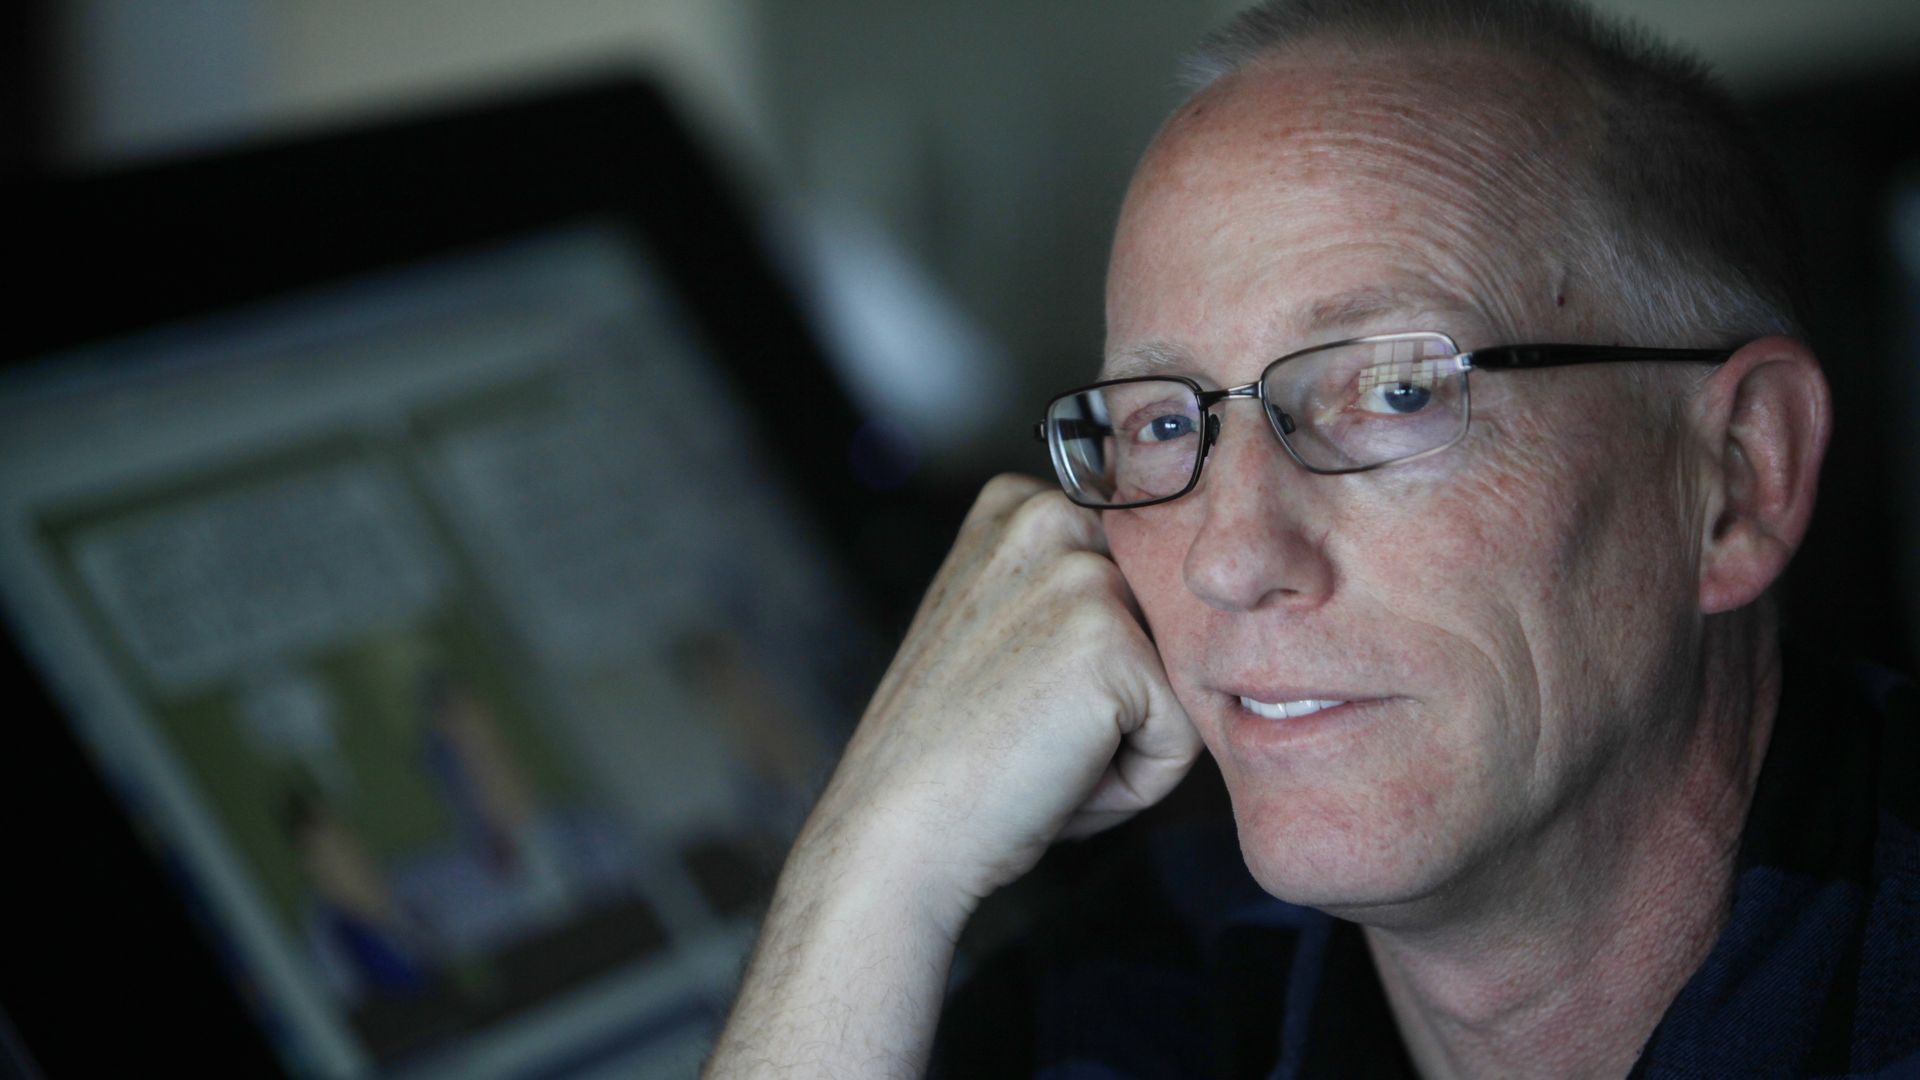 Scott Adams poses for a portrait in his home in January 2014 in Pleasanton, Calif.